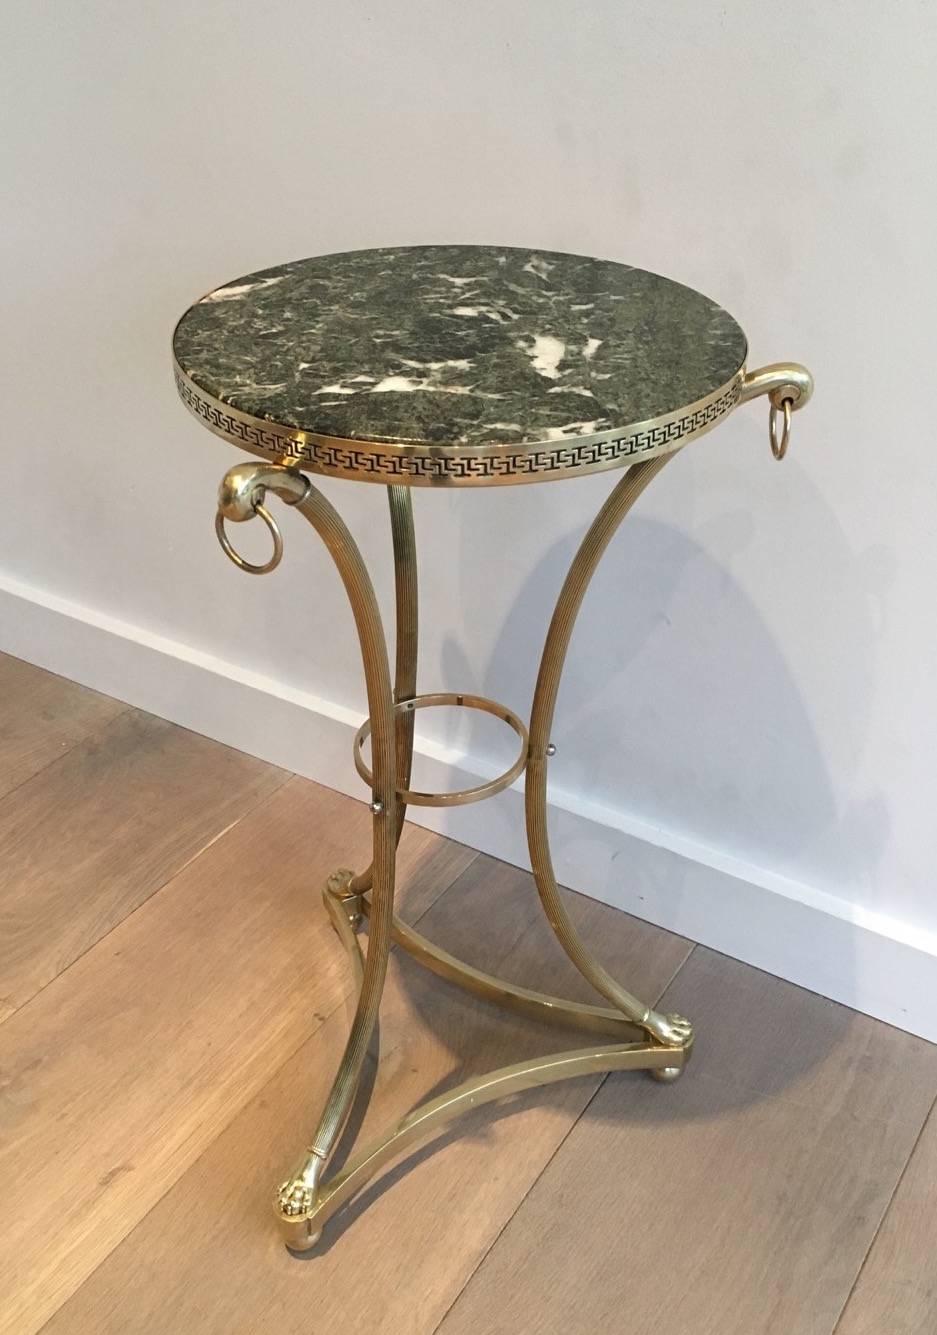 Maison Charles small neoclassical bronze and brass gueridon with green marble top. Clawfeet and Greek key decor.

This table is  currently in France, please allow 2 to 4 weeks delivery to New York. Shipping costs from France to our warehouse in New